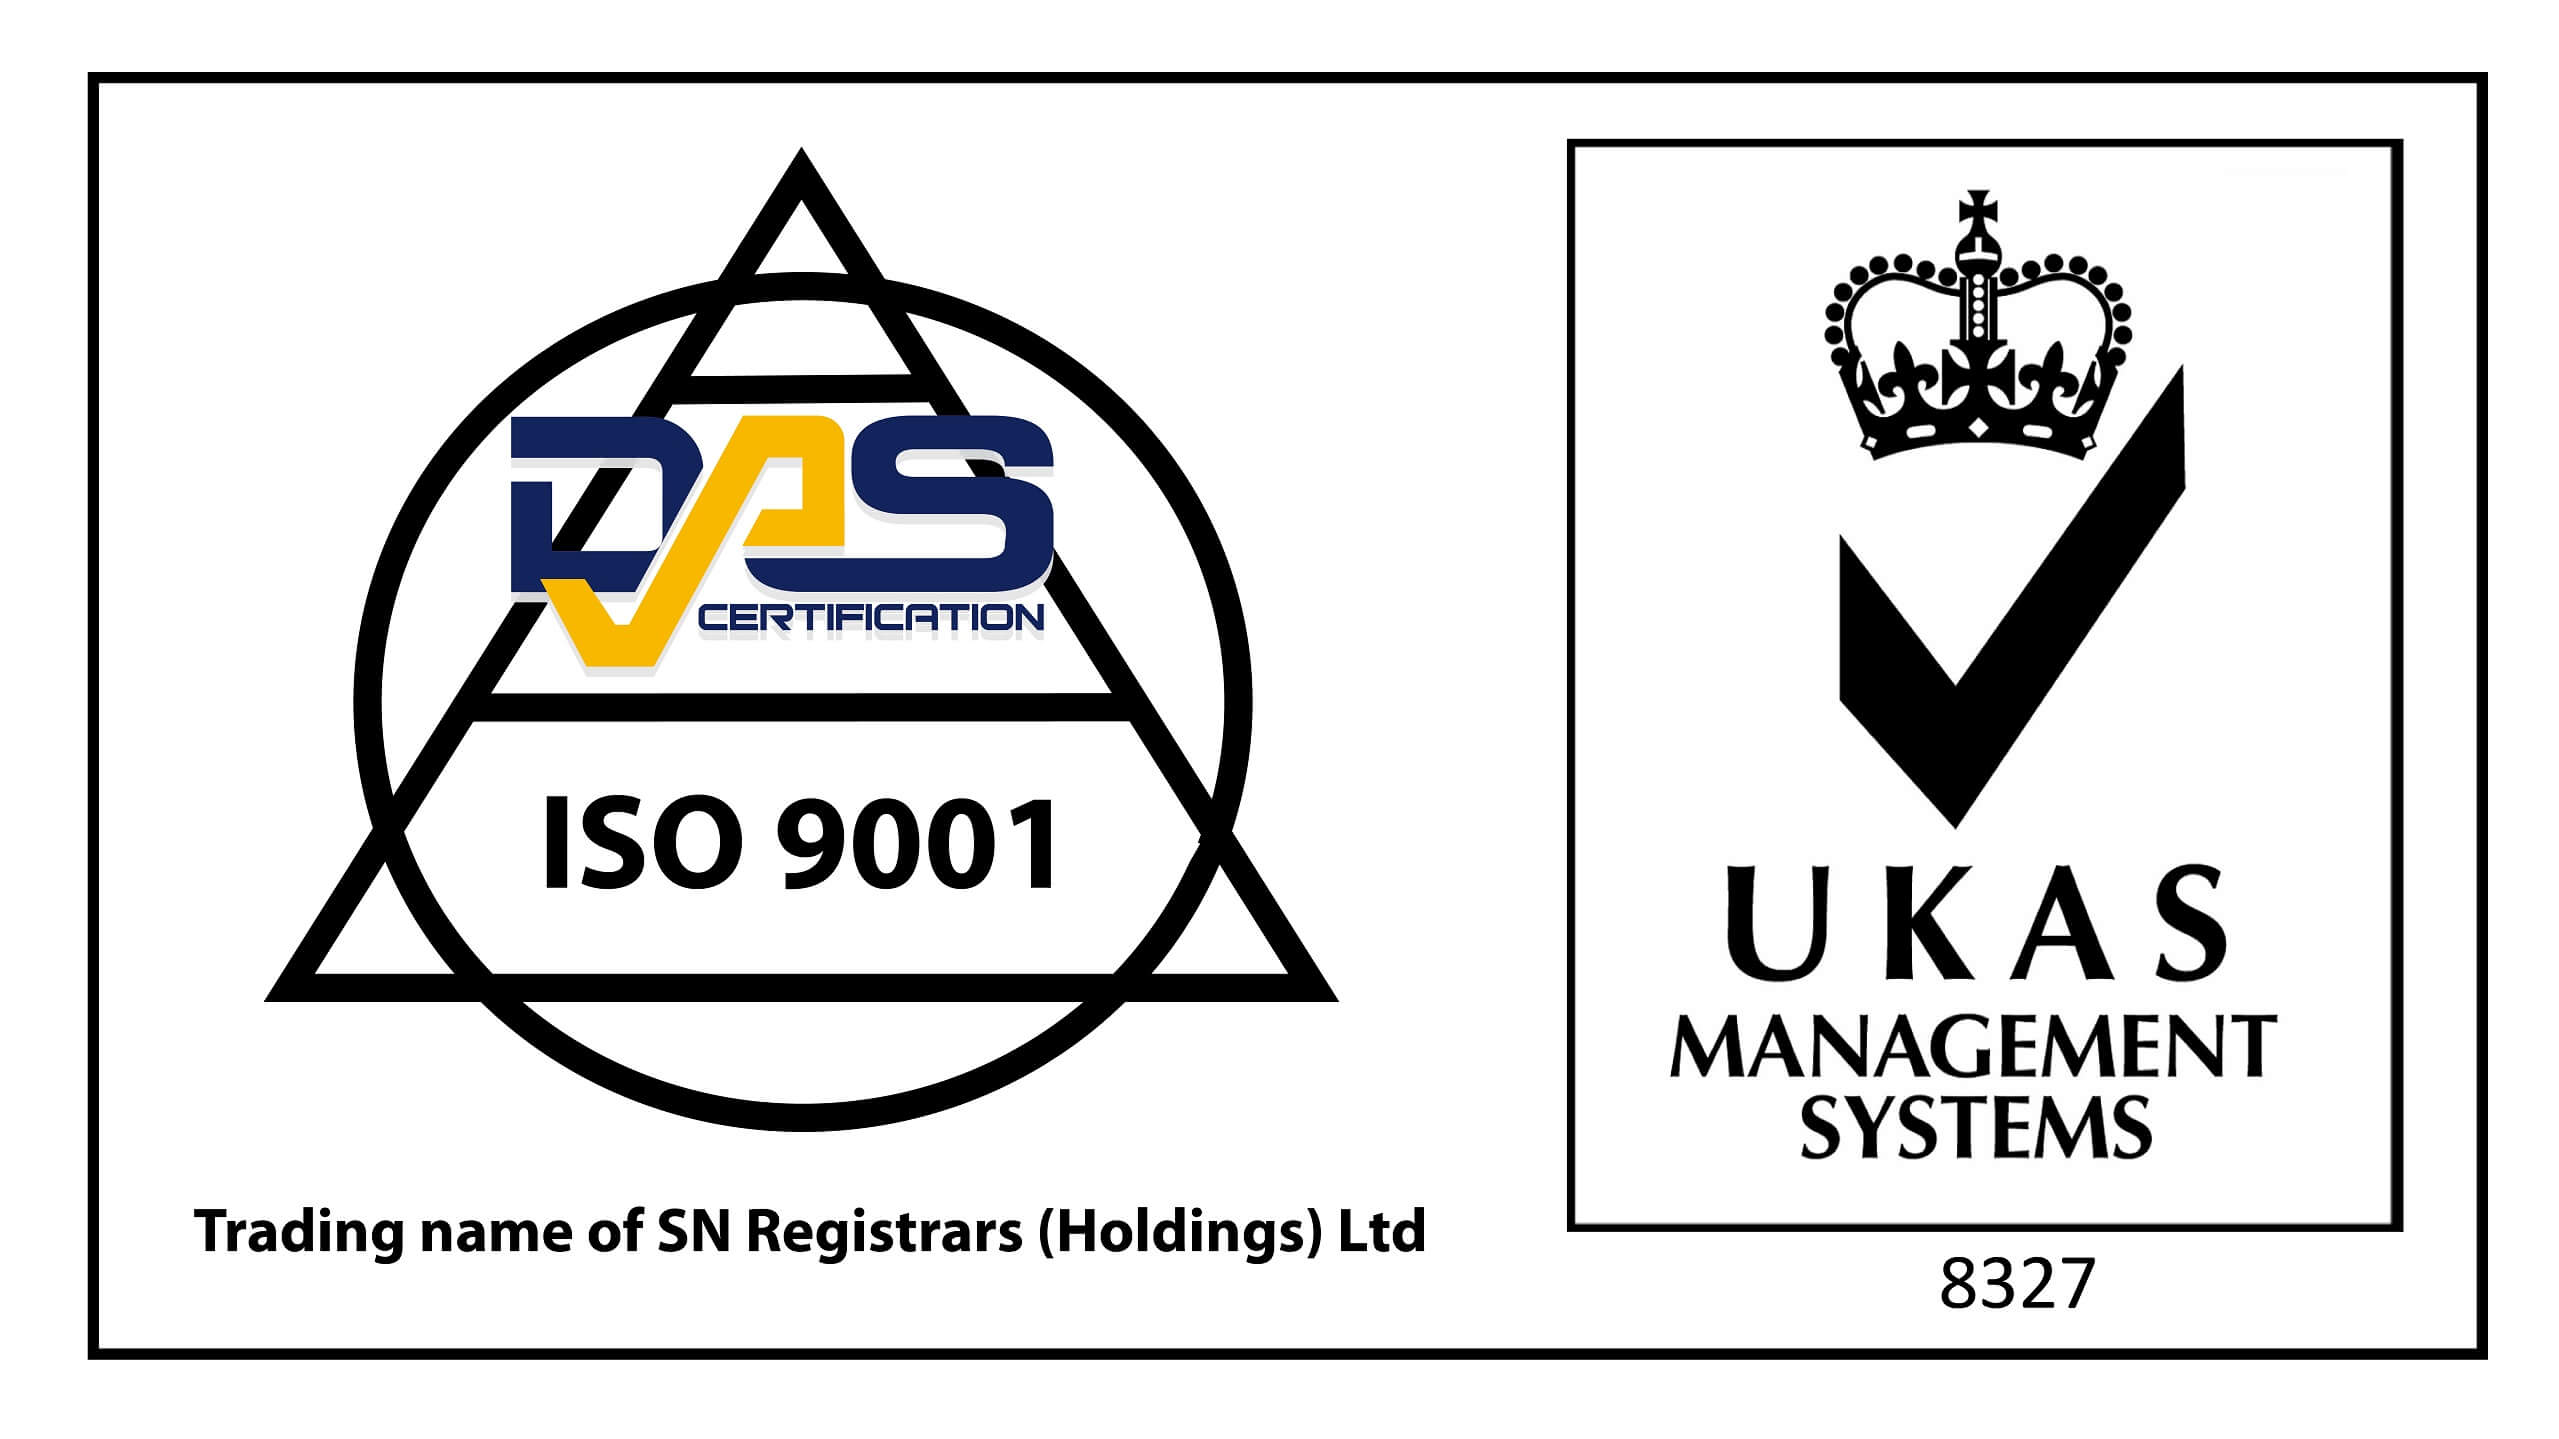 [certificate] ISO 9001